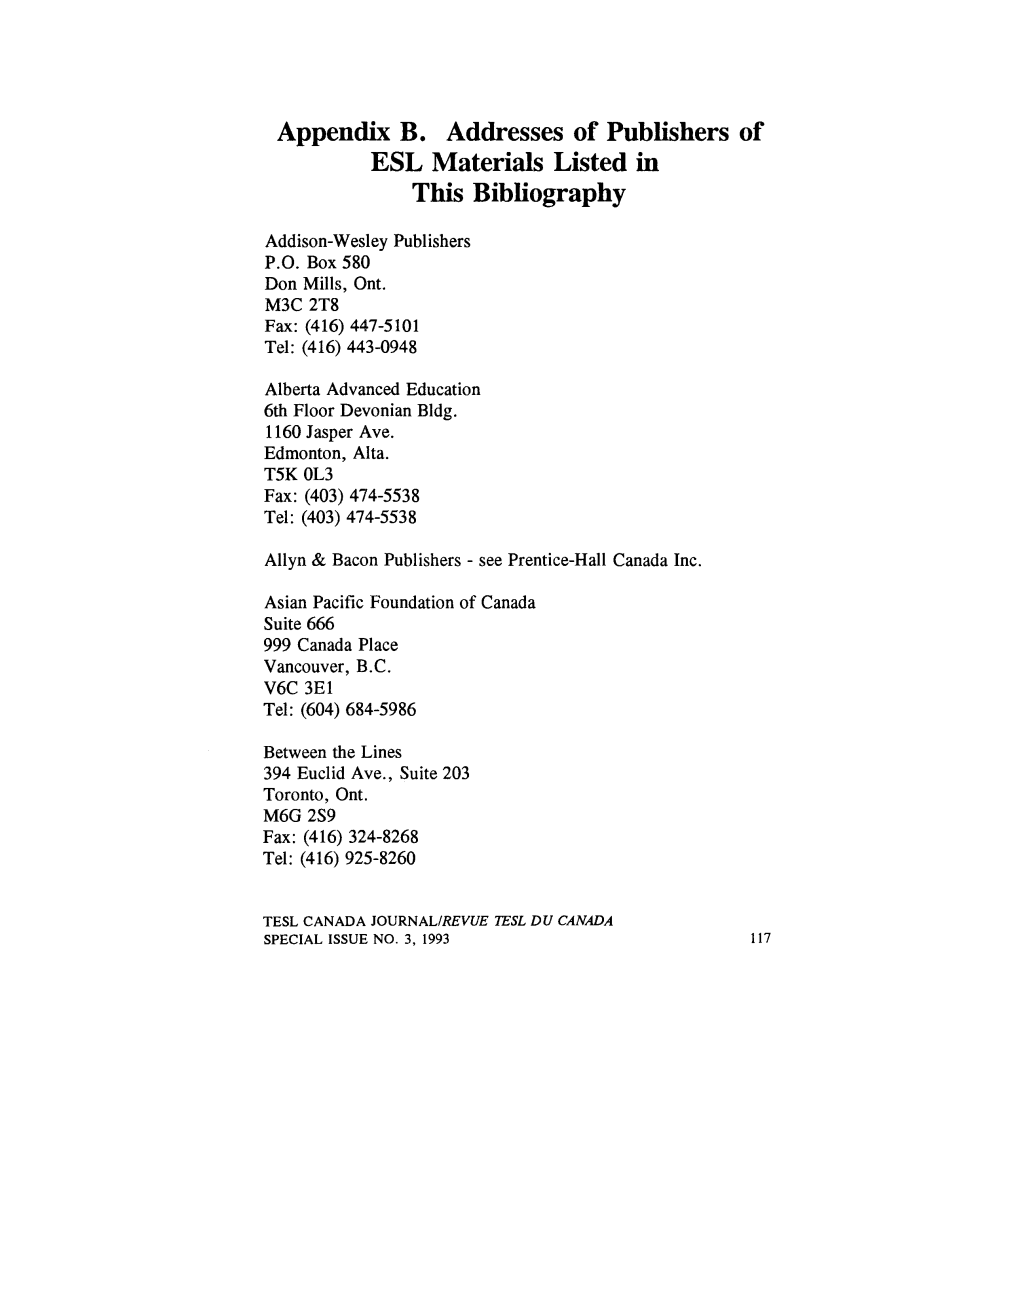 Appendix B. Addresses of Publishers of ESL Materials Listed in This Bibliography